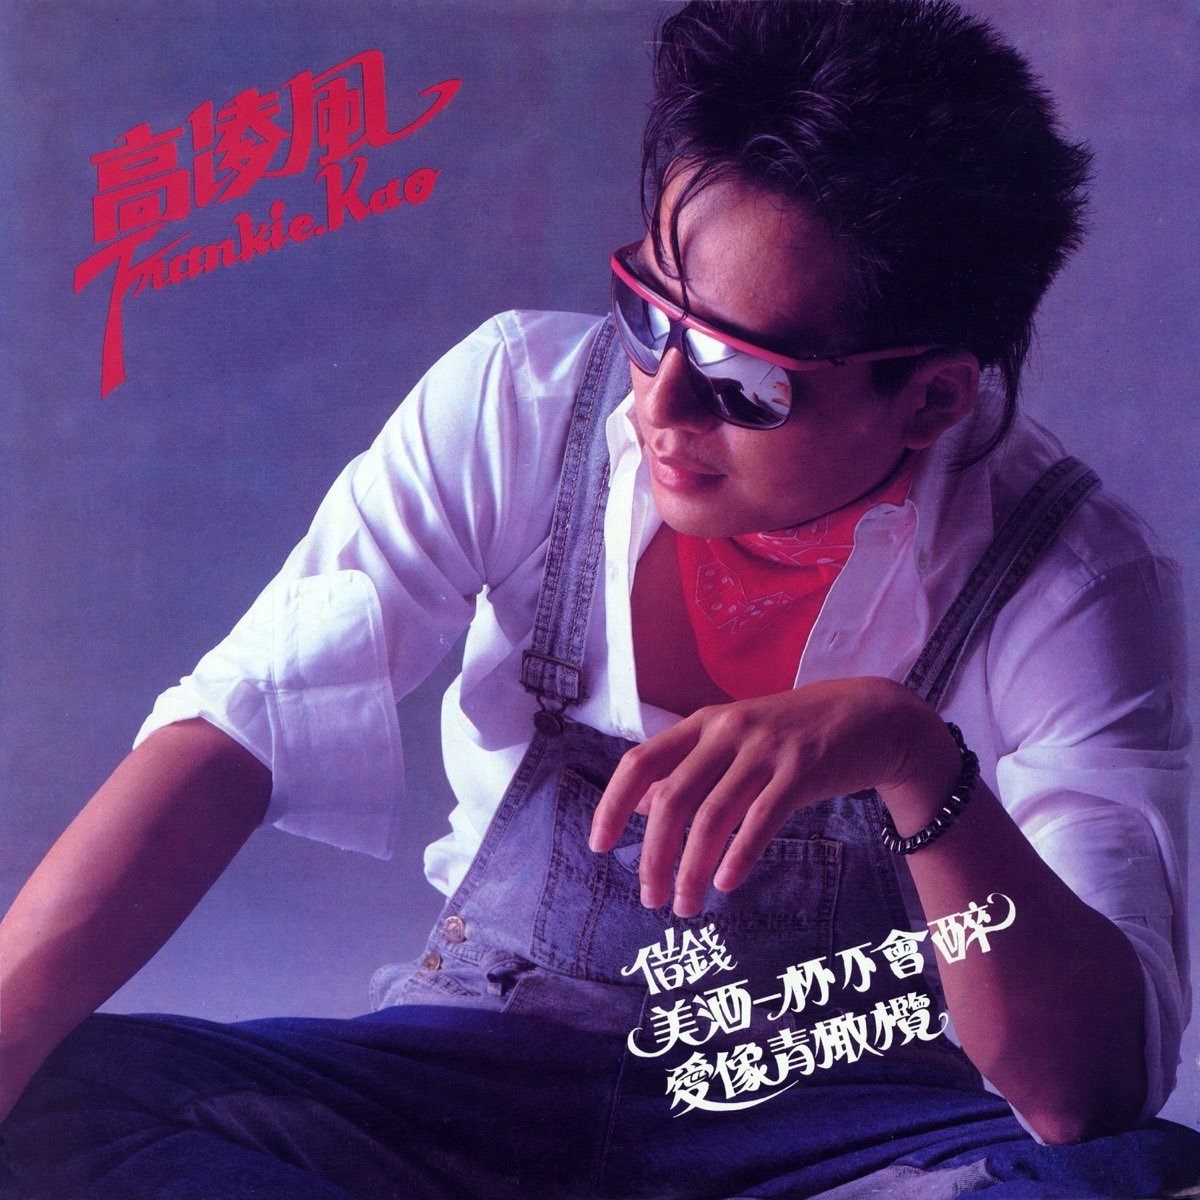 A disco single by Frankie Kao. As Taiwan’s younger generation dust off disco records from the 1970s and ’80s, so, too, are scholars looking into how the island came to embrace a Western music genre at a time when even dancing in public was illegal. 